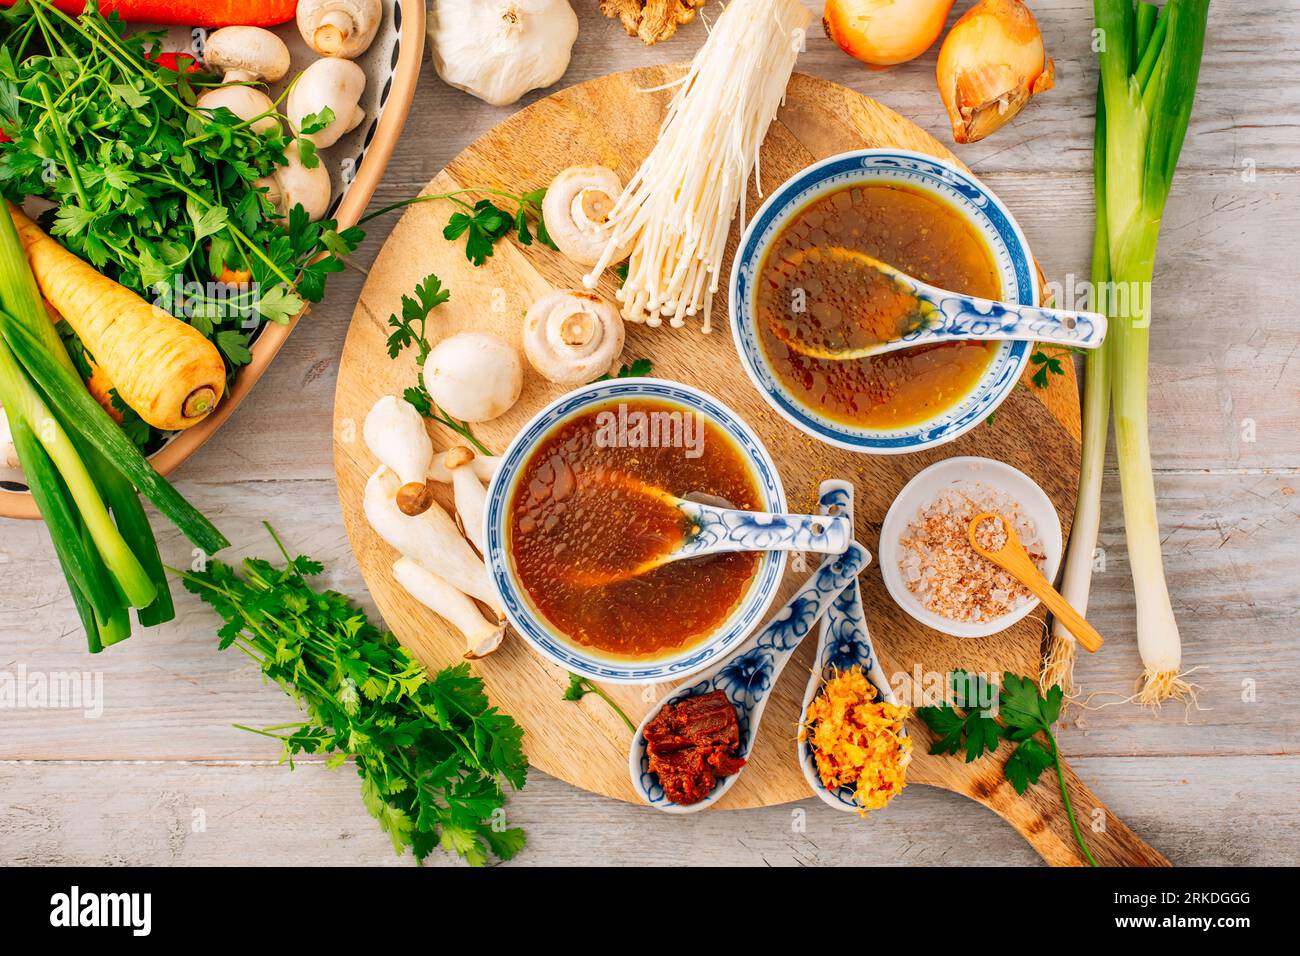 Miso, ramen or vegetable broth with ingredients on wooden background Stock Photo